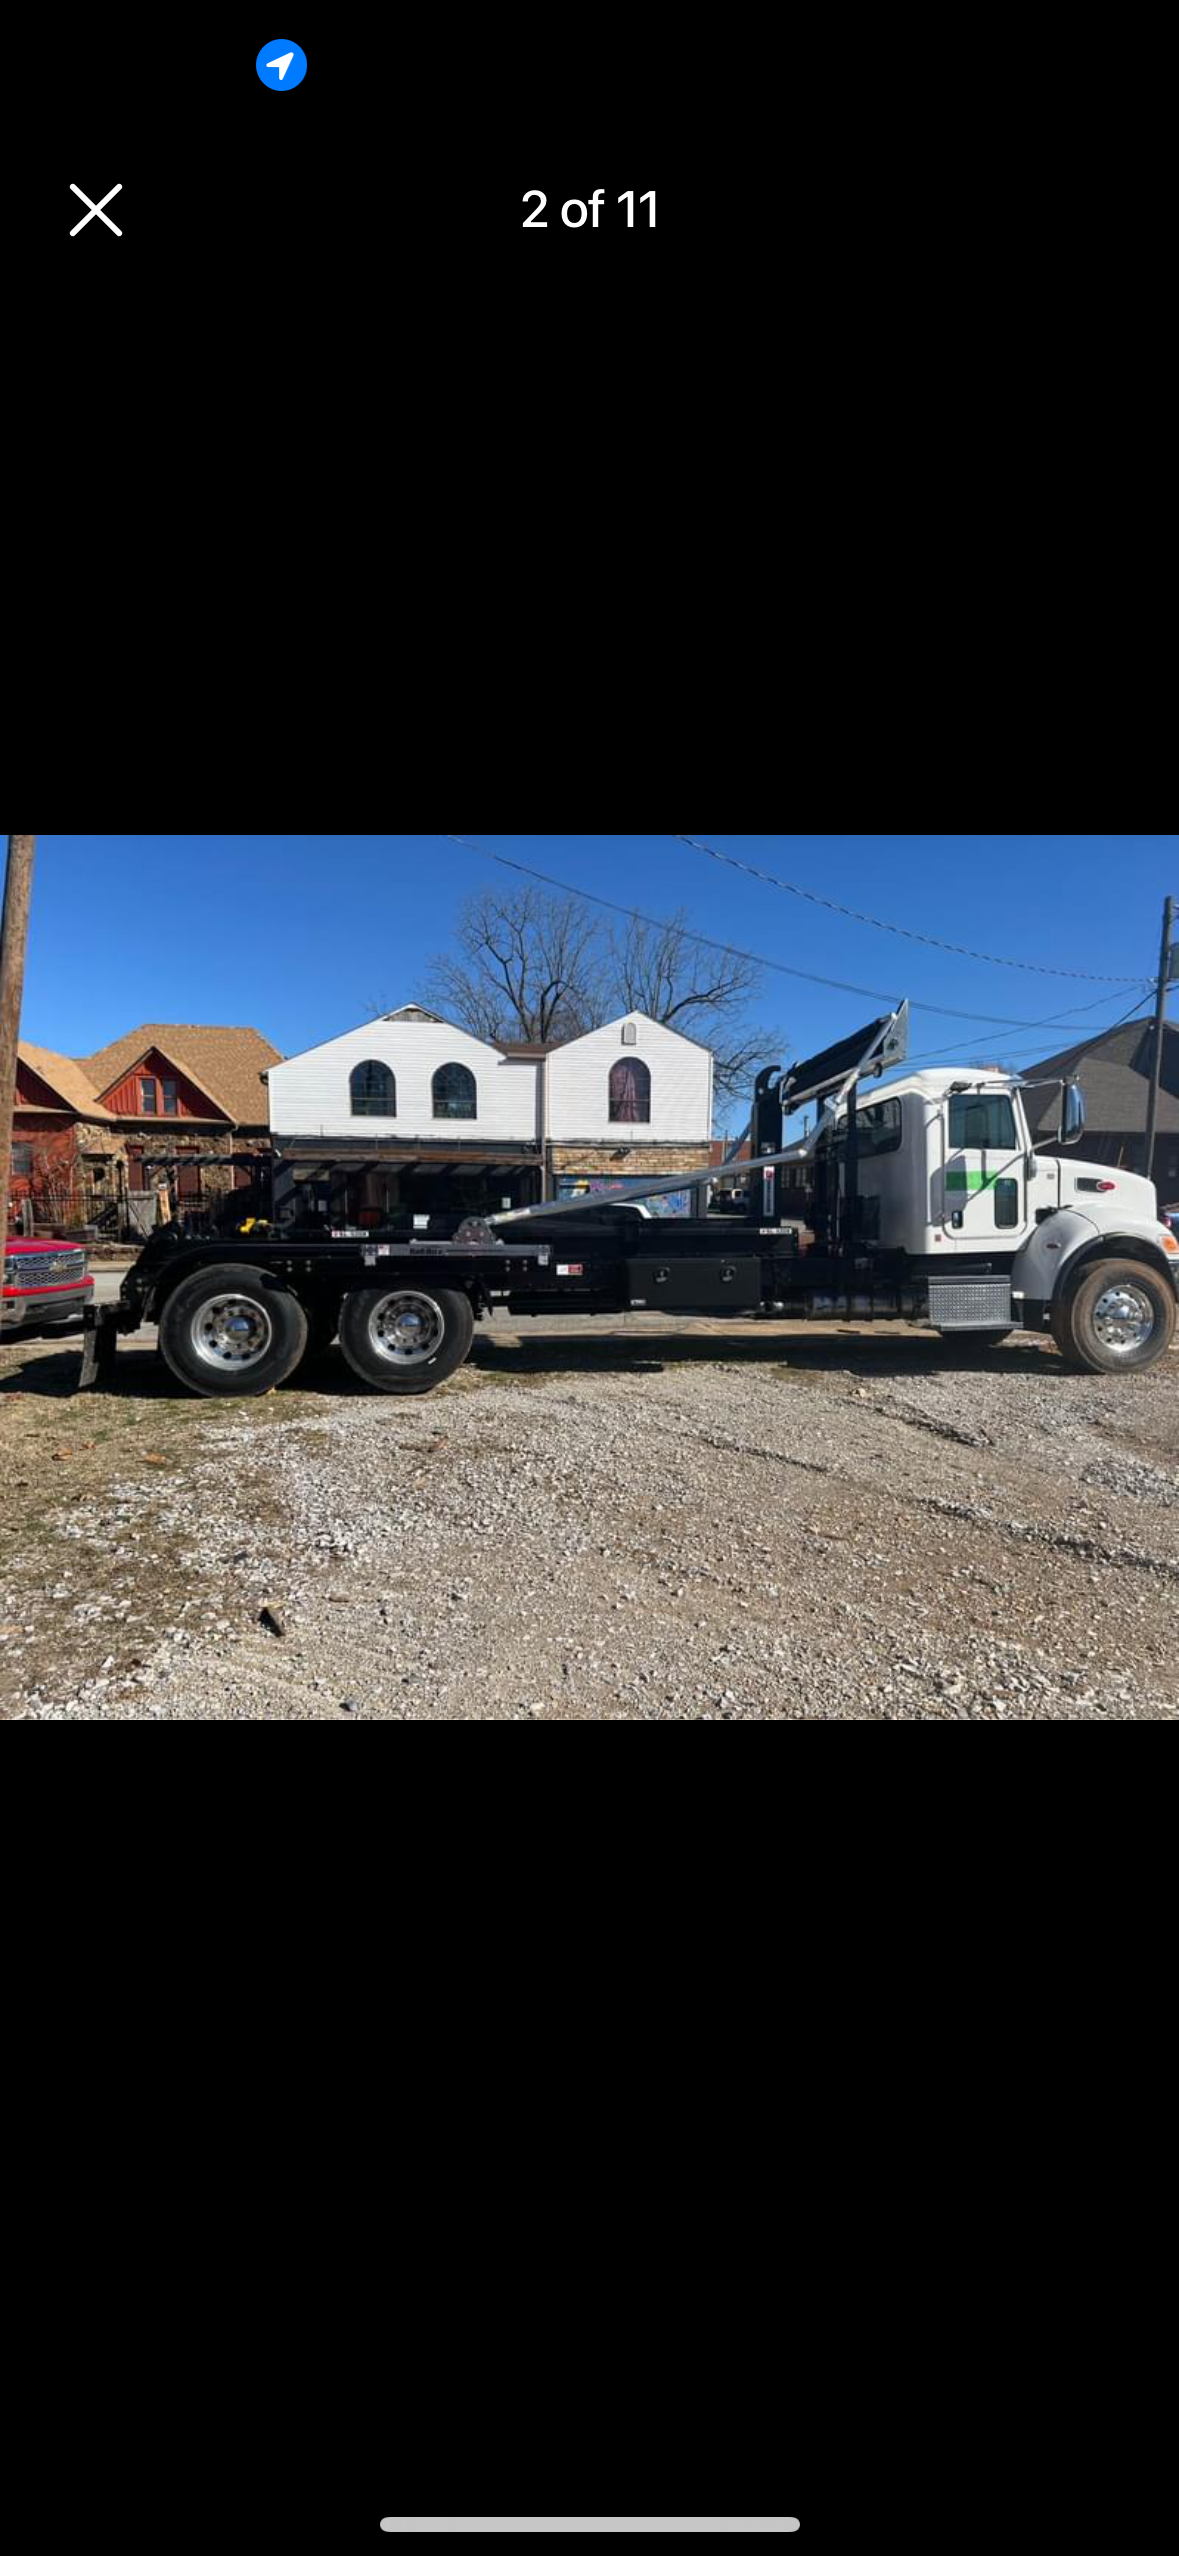 A tow truck is parked in a gravel lot next to a house.